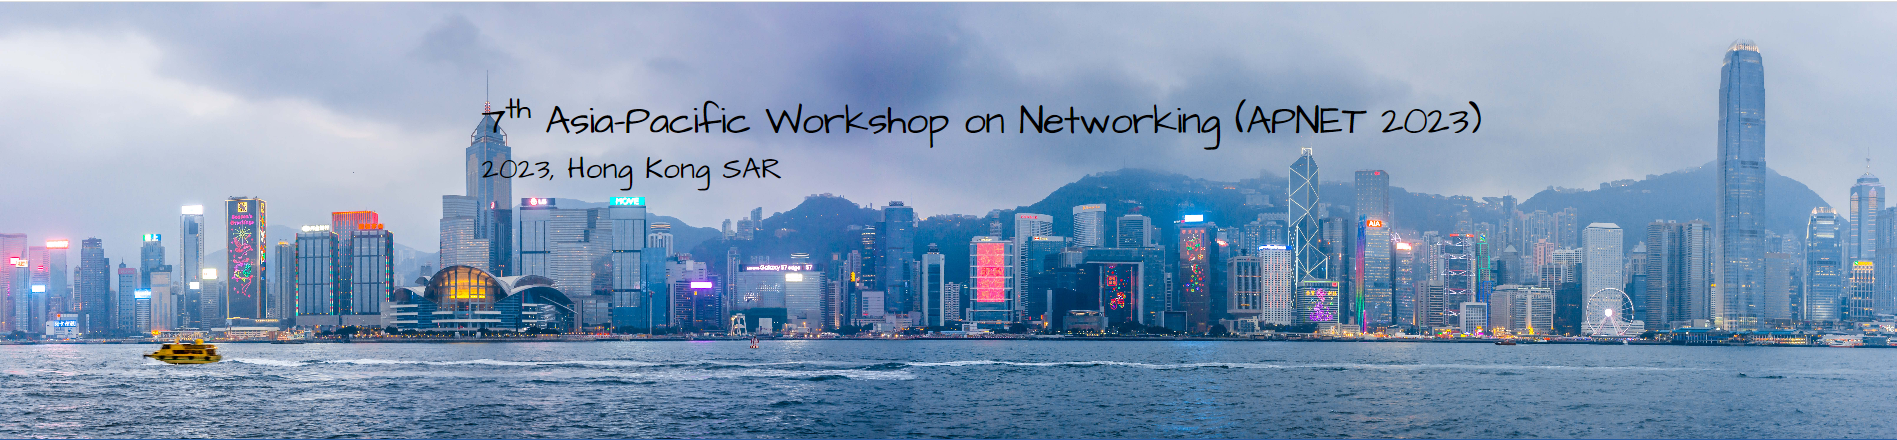 The 7th Asia-Pacific Workshop on Networking (APNet 2023)